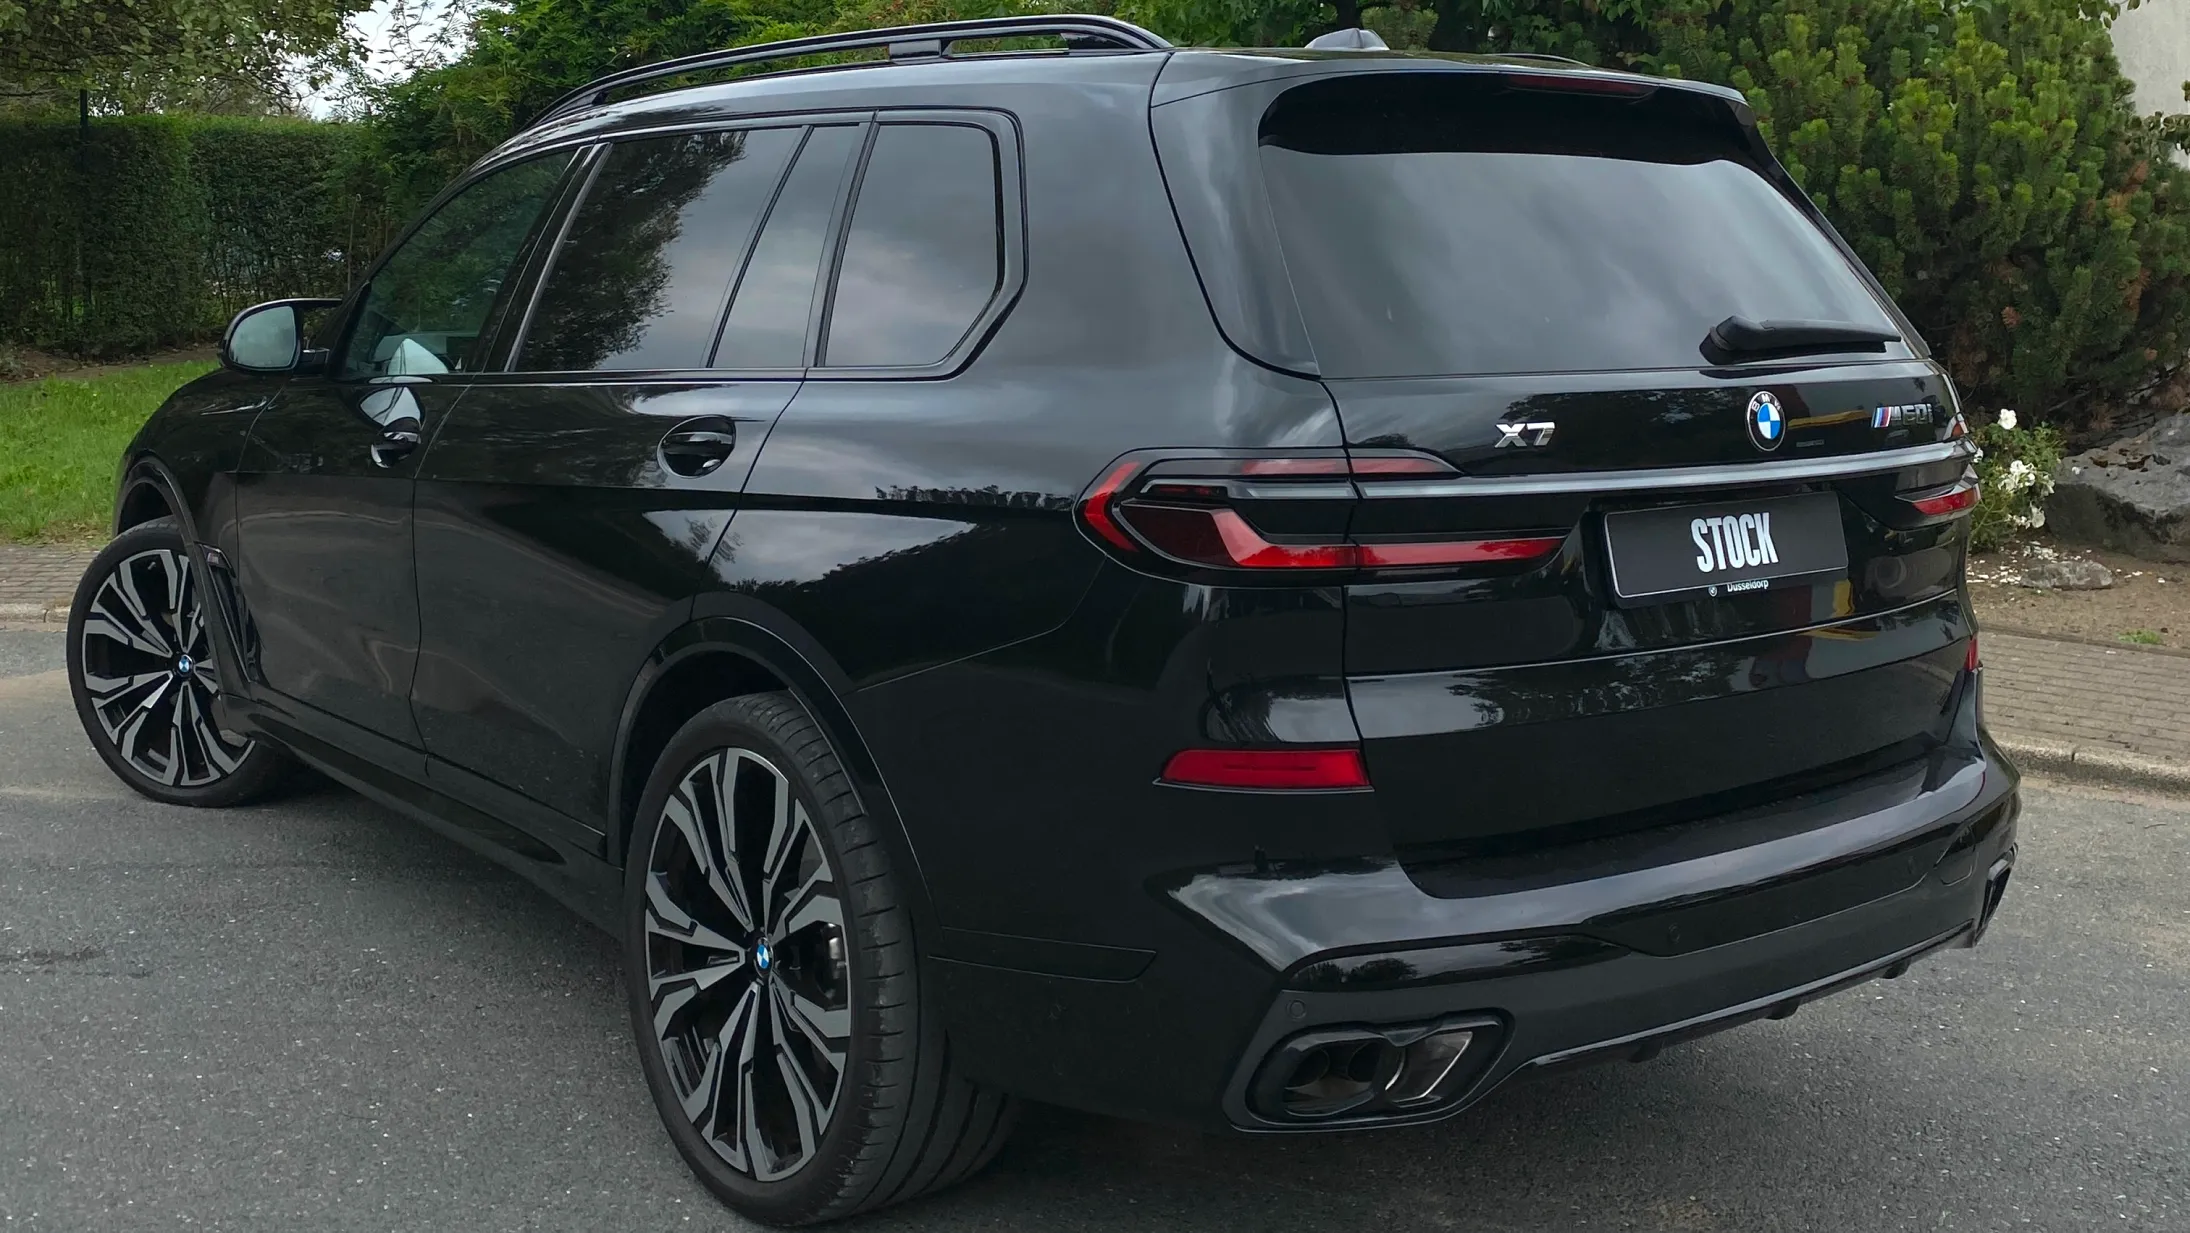 Rear angle view on a BMW X7 with a body kit giving the car a custom appearance